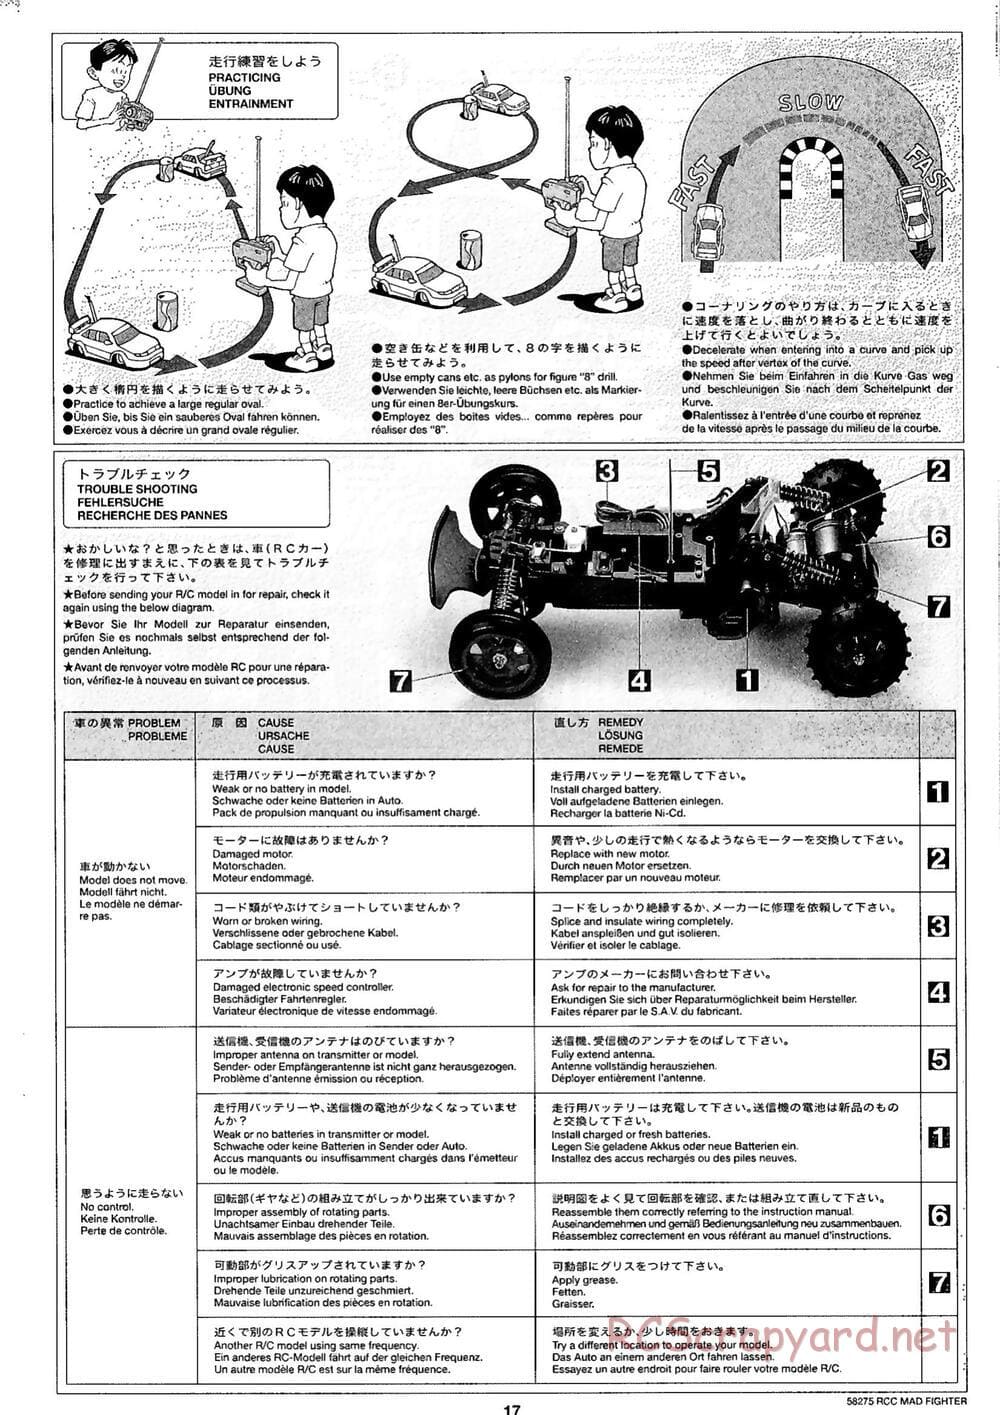 Tamiya - Mad Fighter Chassis - Manual - Page 17